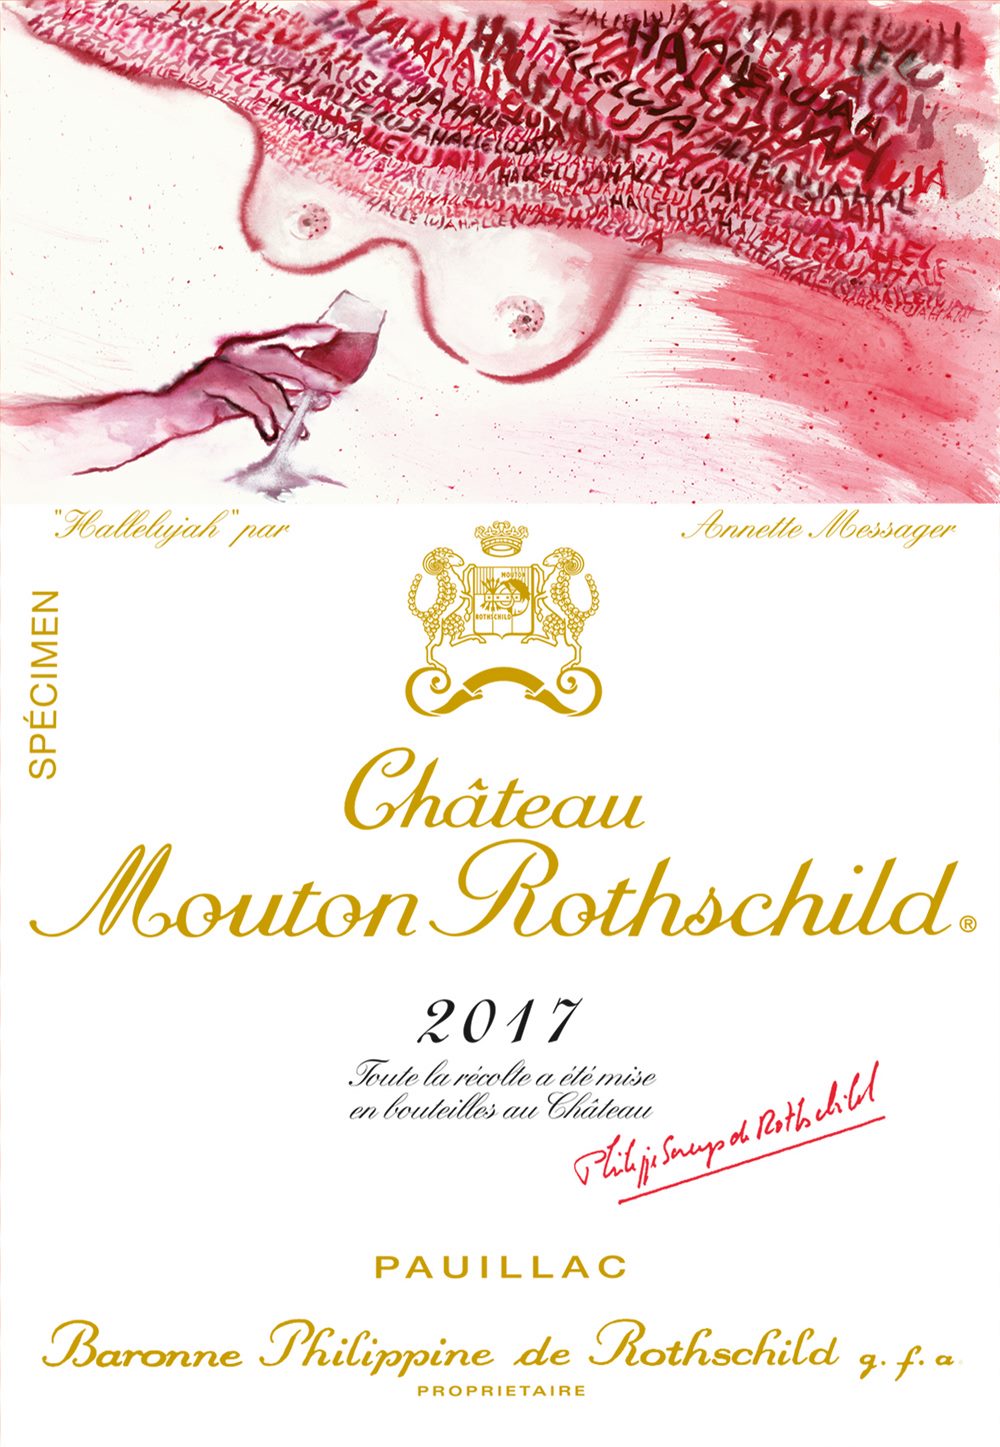 Annette Messager illustrates the label of 2017 Château Mouton Rothschild